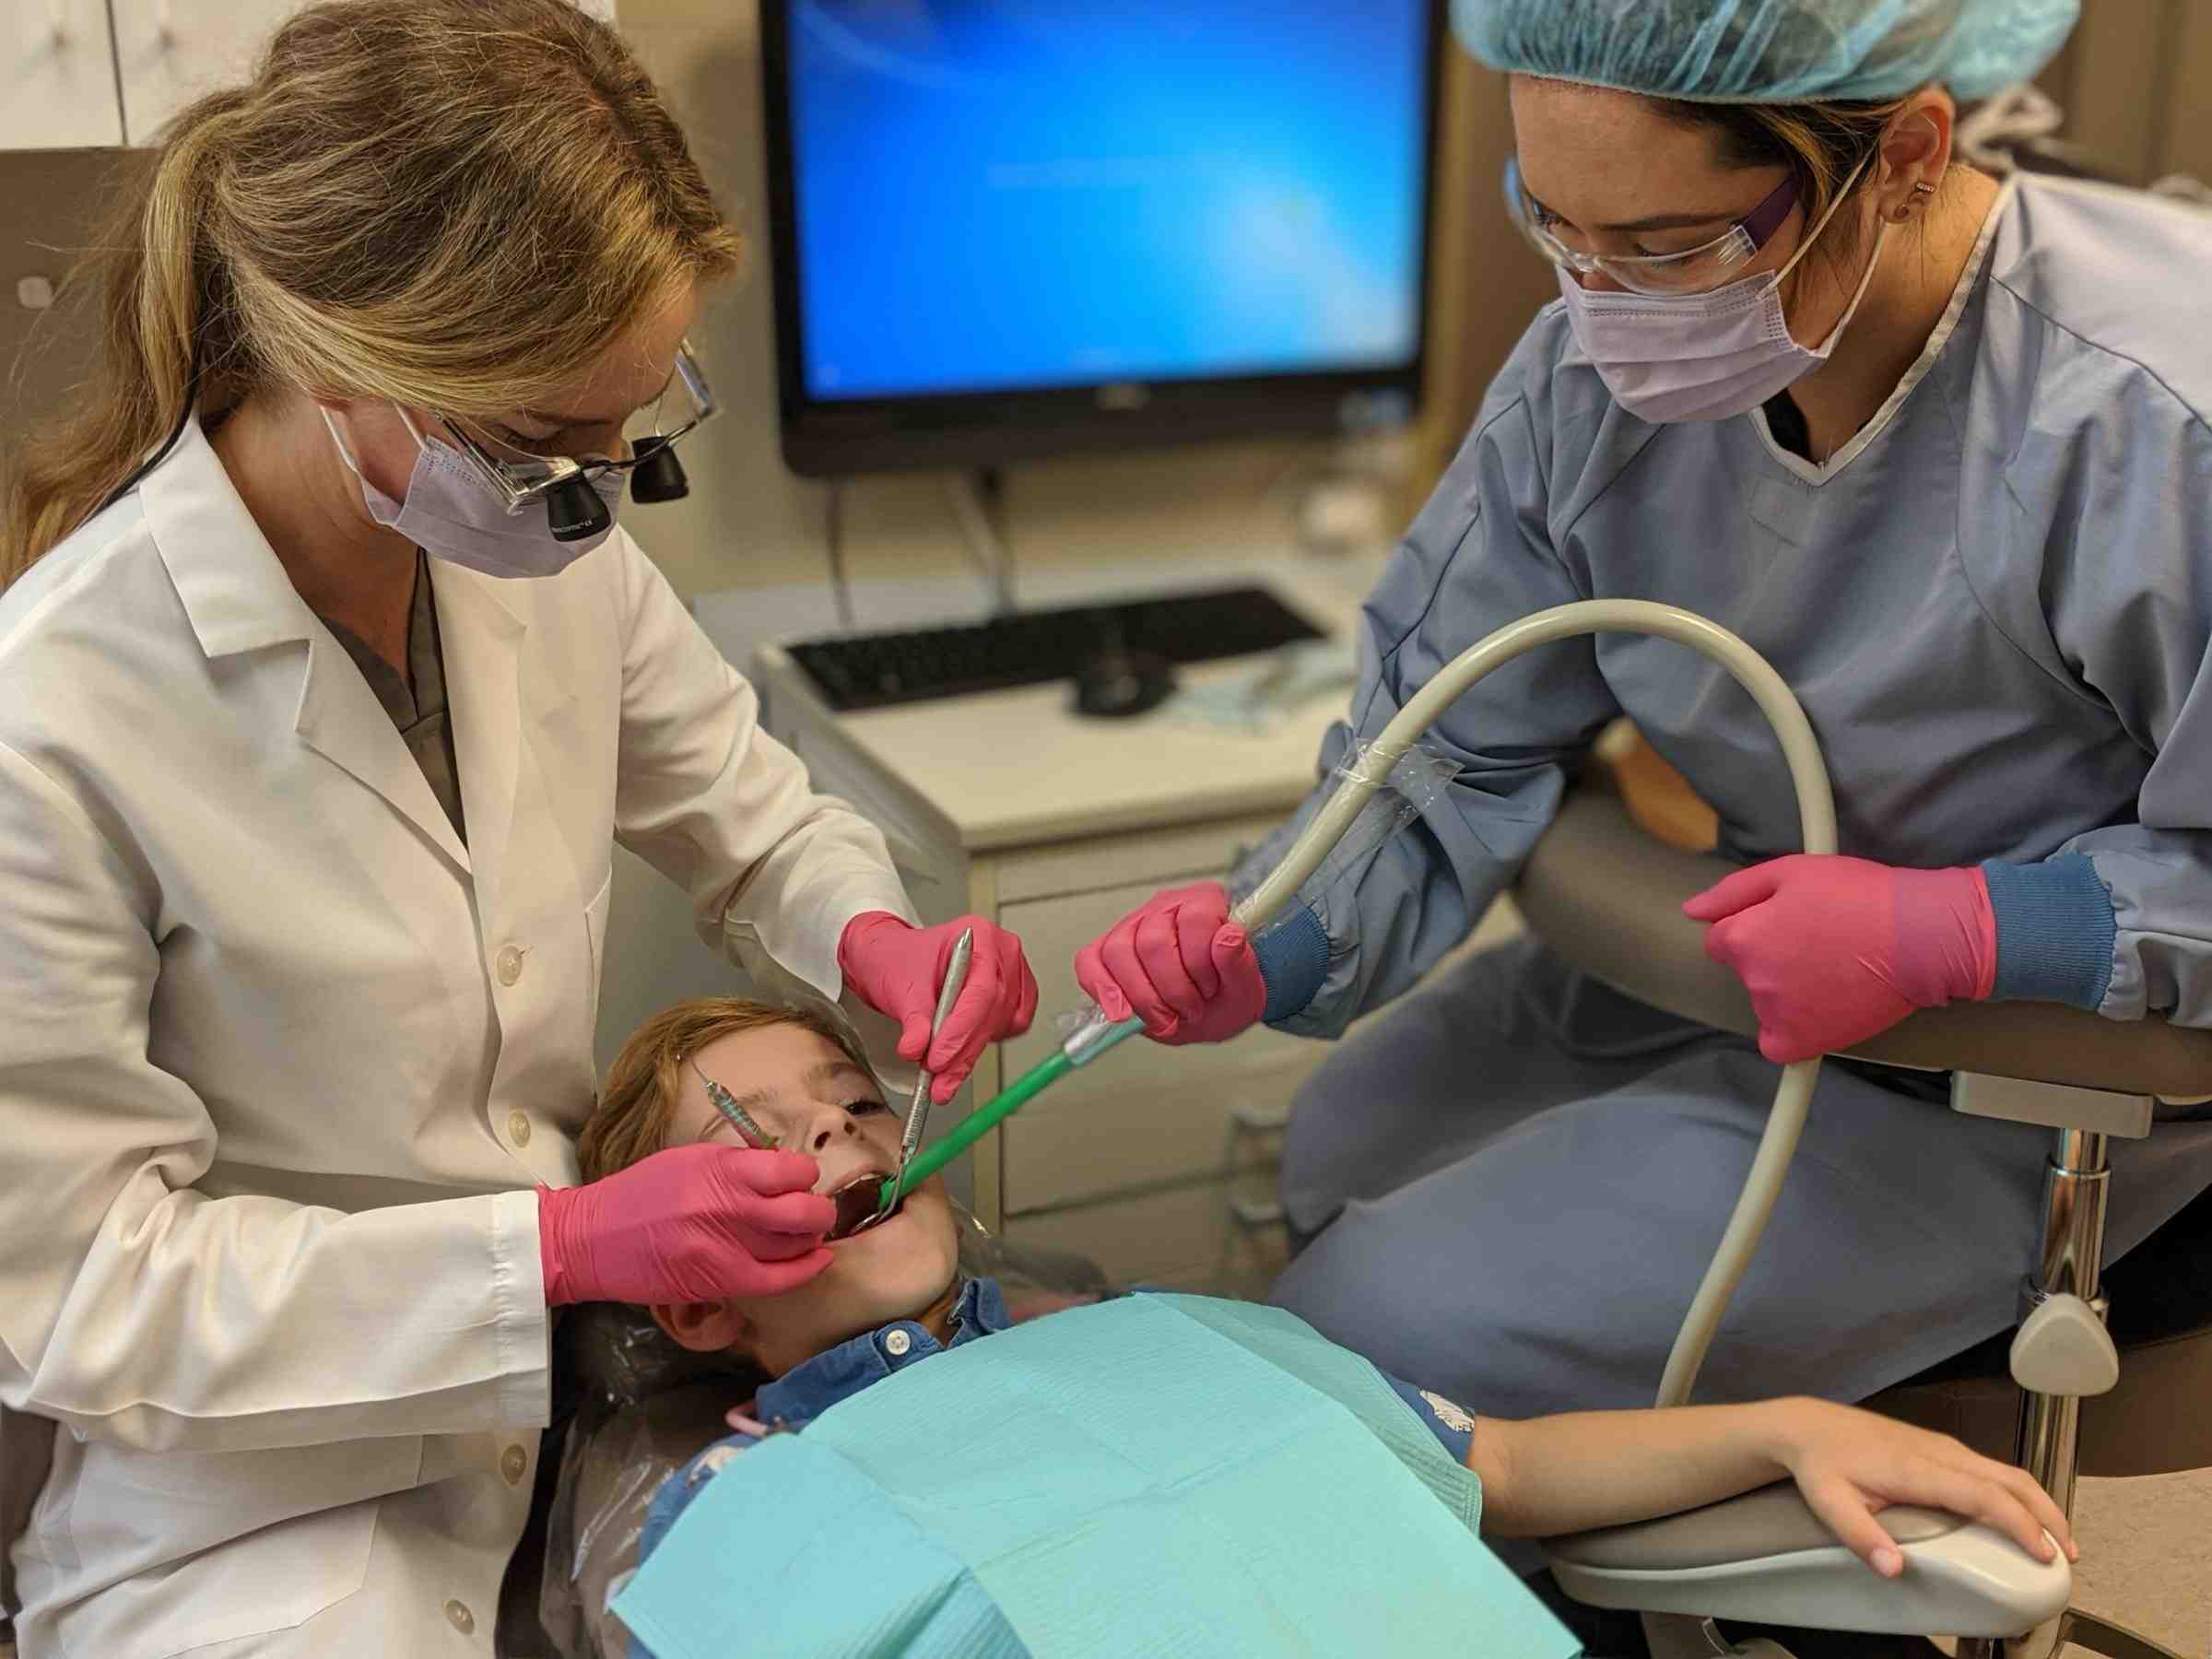 How can I get dental work without insurance?